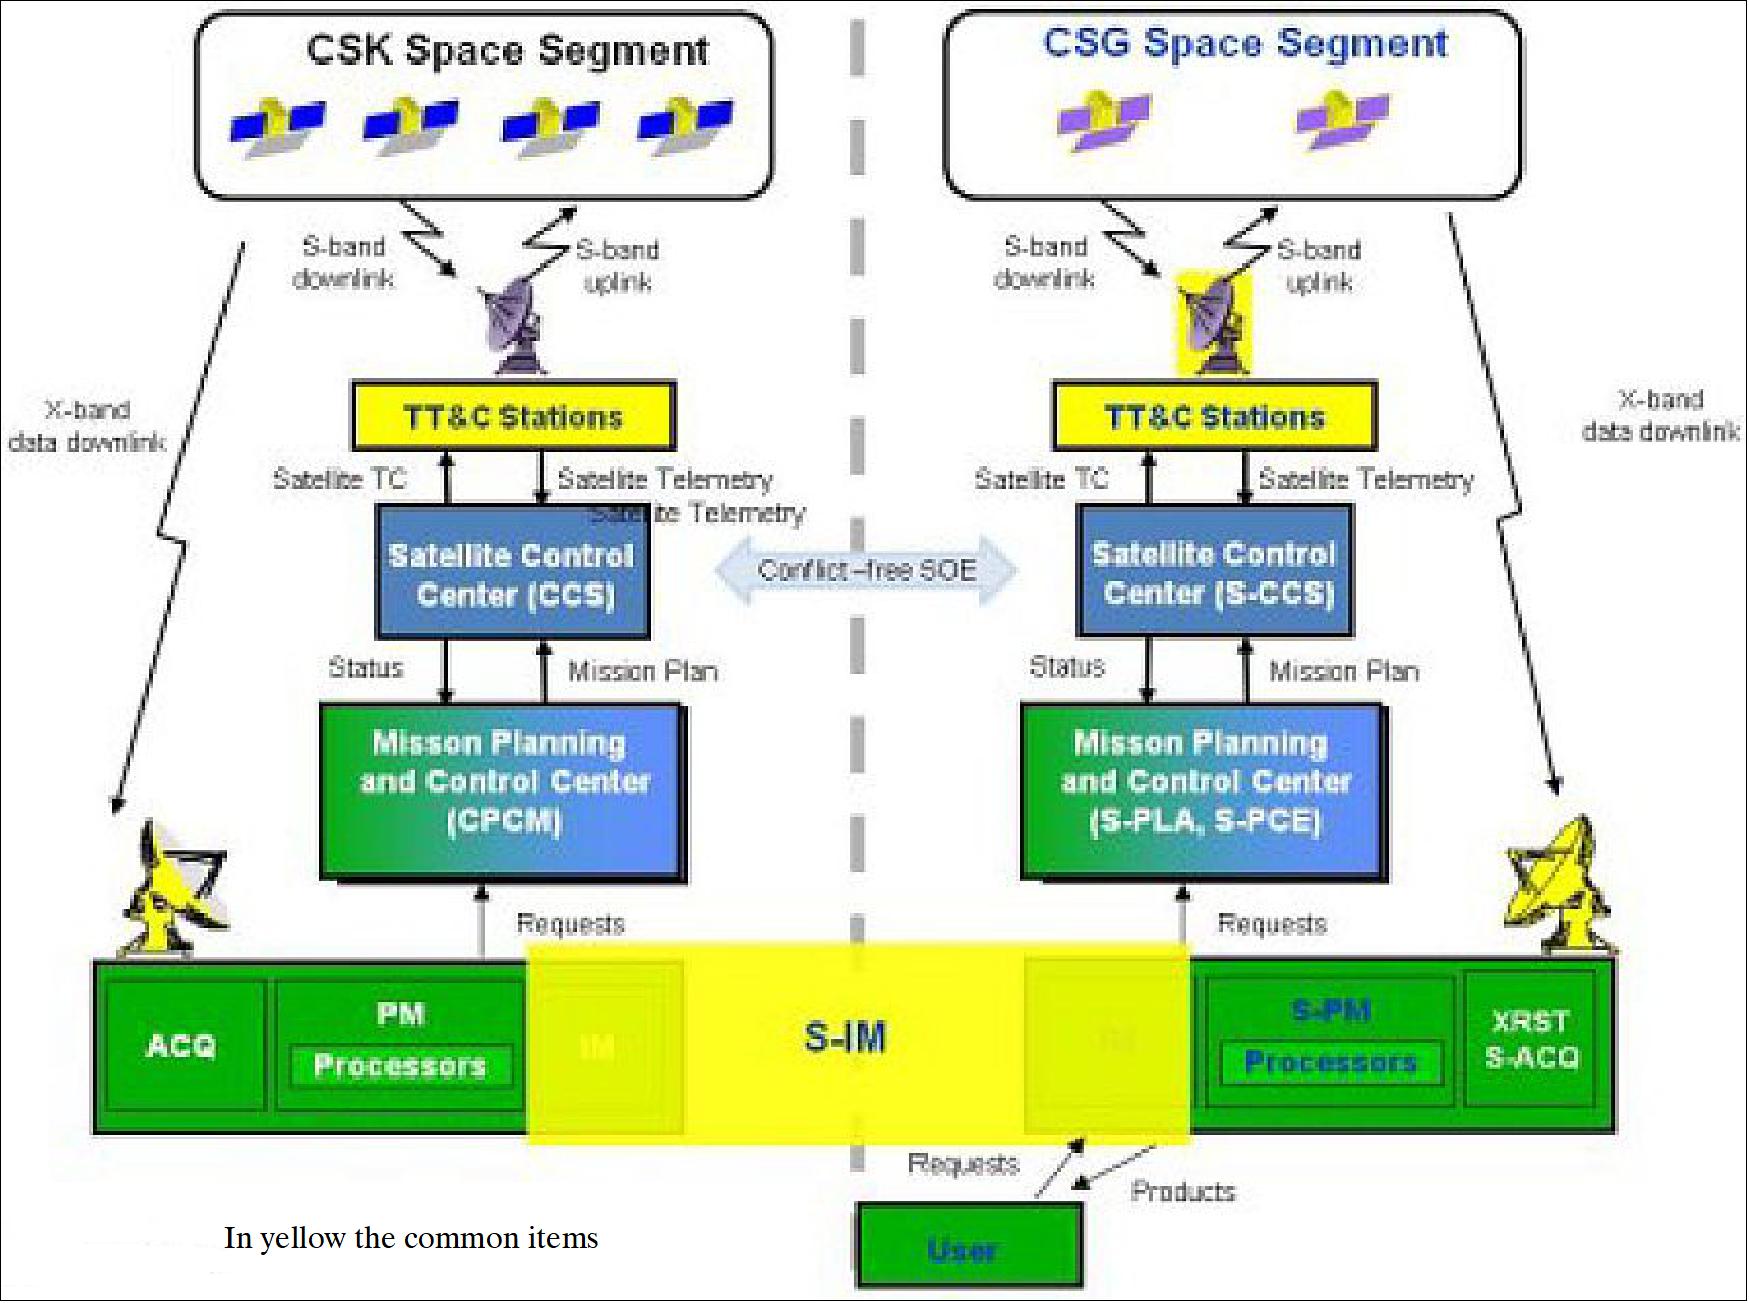 Figure 20: Logical view of the GS upgrading (image credit: TAS-I, ASI)